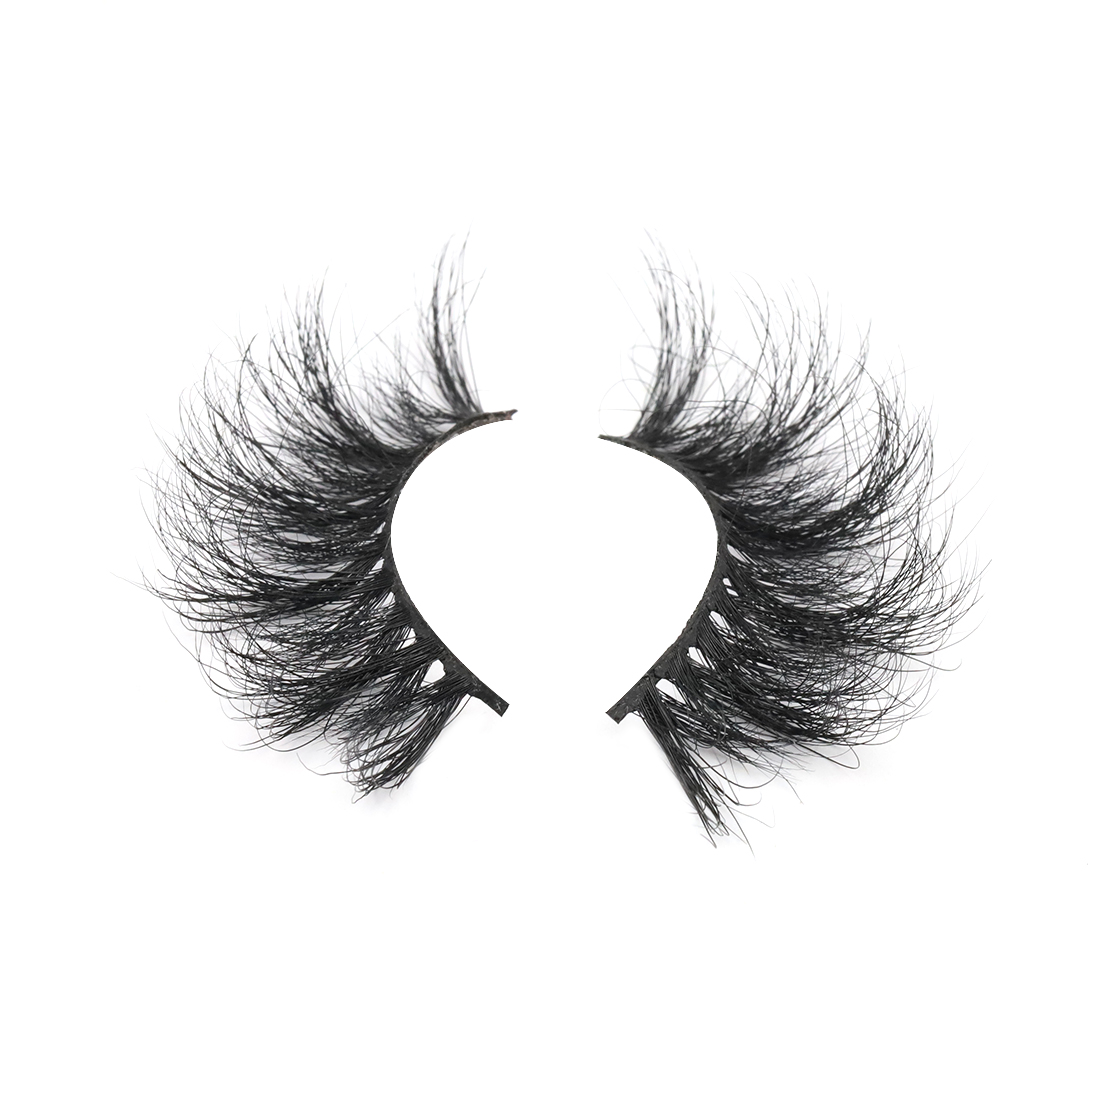 EMEDA newest Private Label 3D real mink lashes-DNL series YZZ